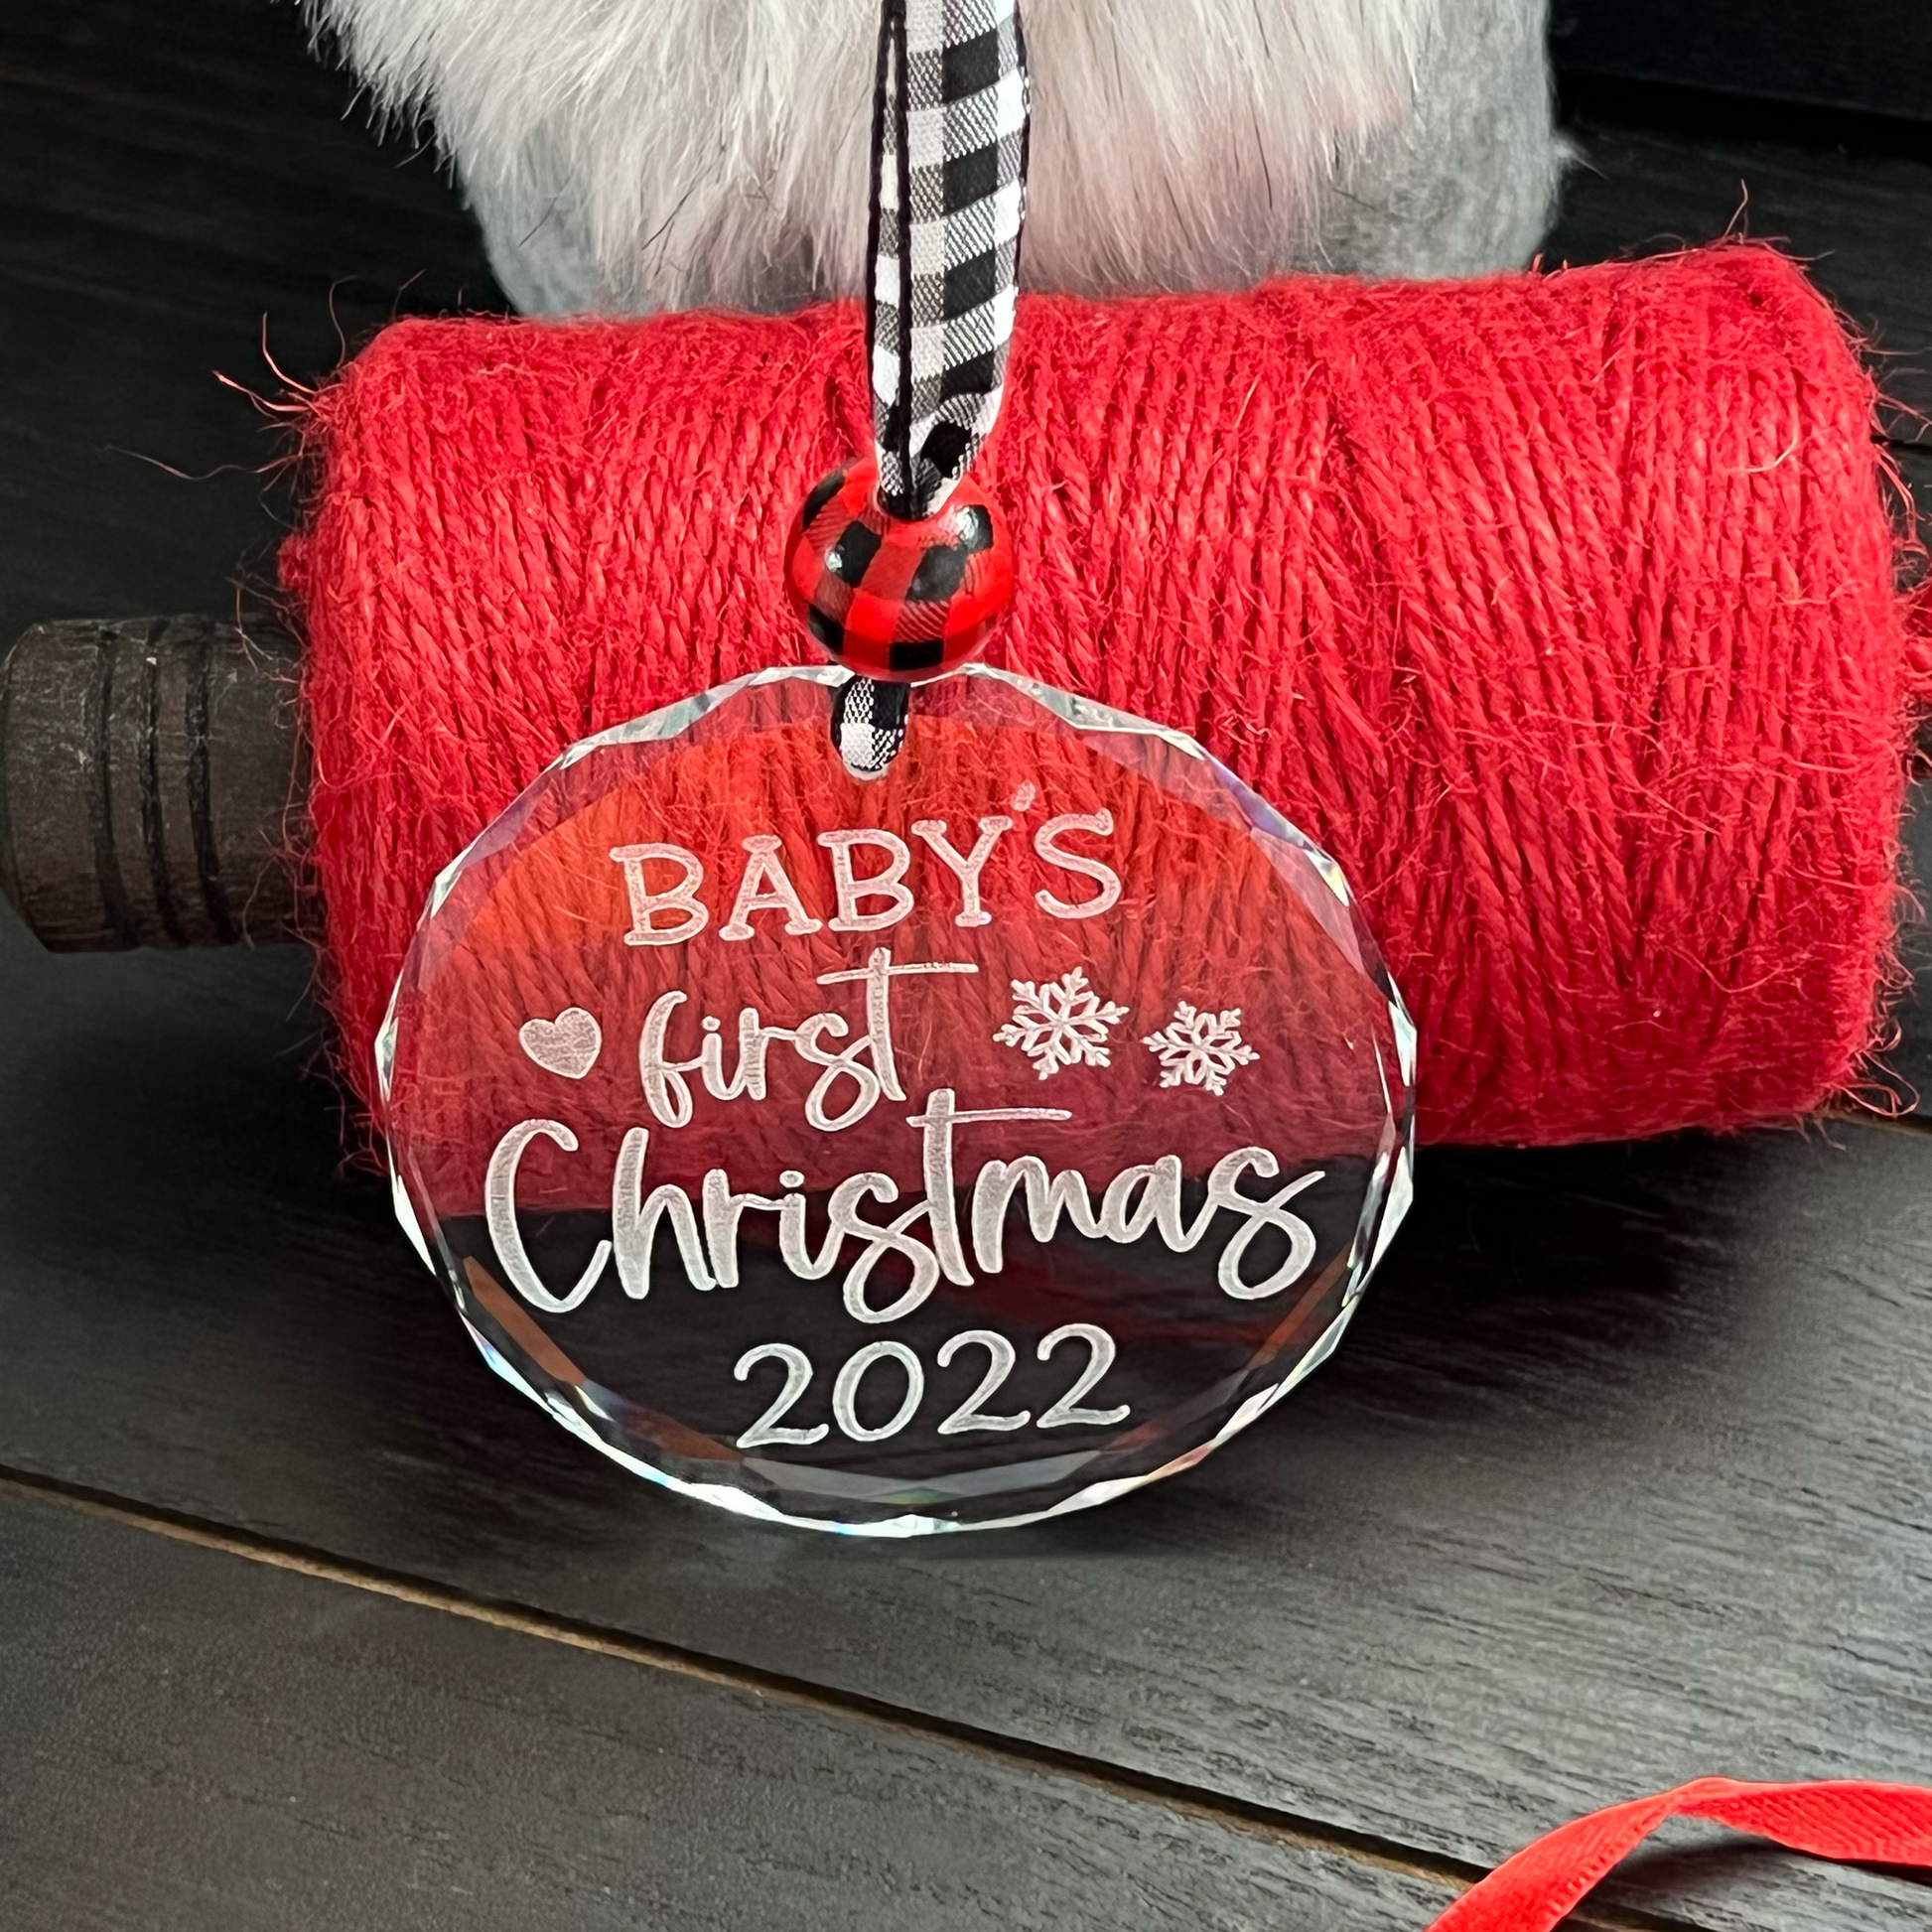 Babys first christmas large glass engraved ornament